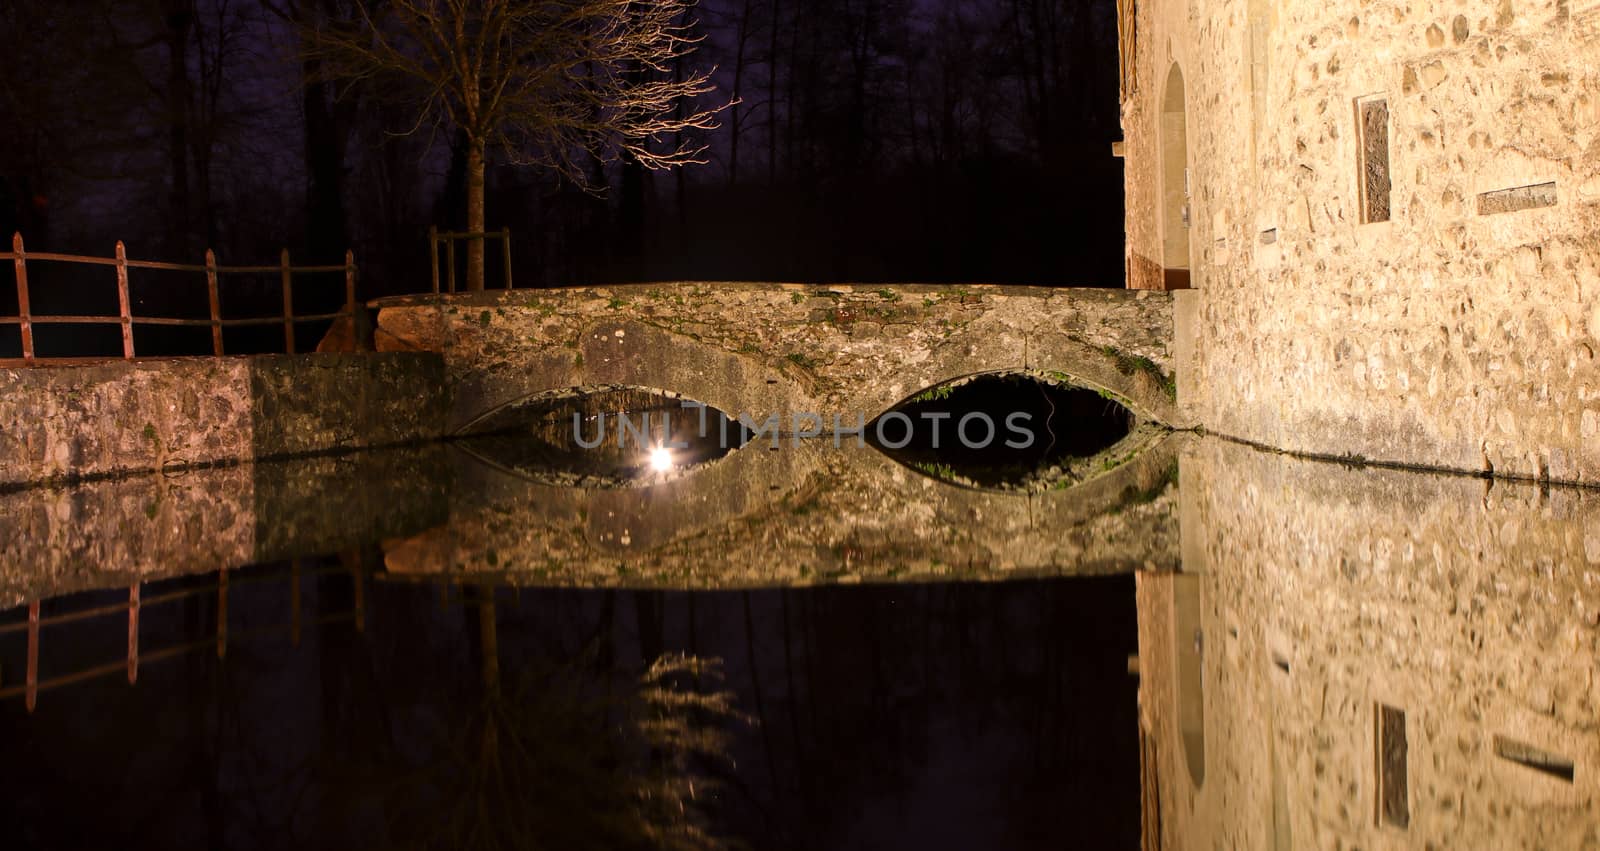 Bridge over water with reflection in the water. Night shot